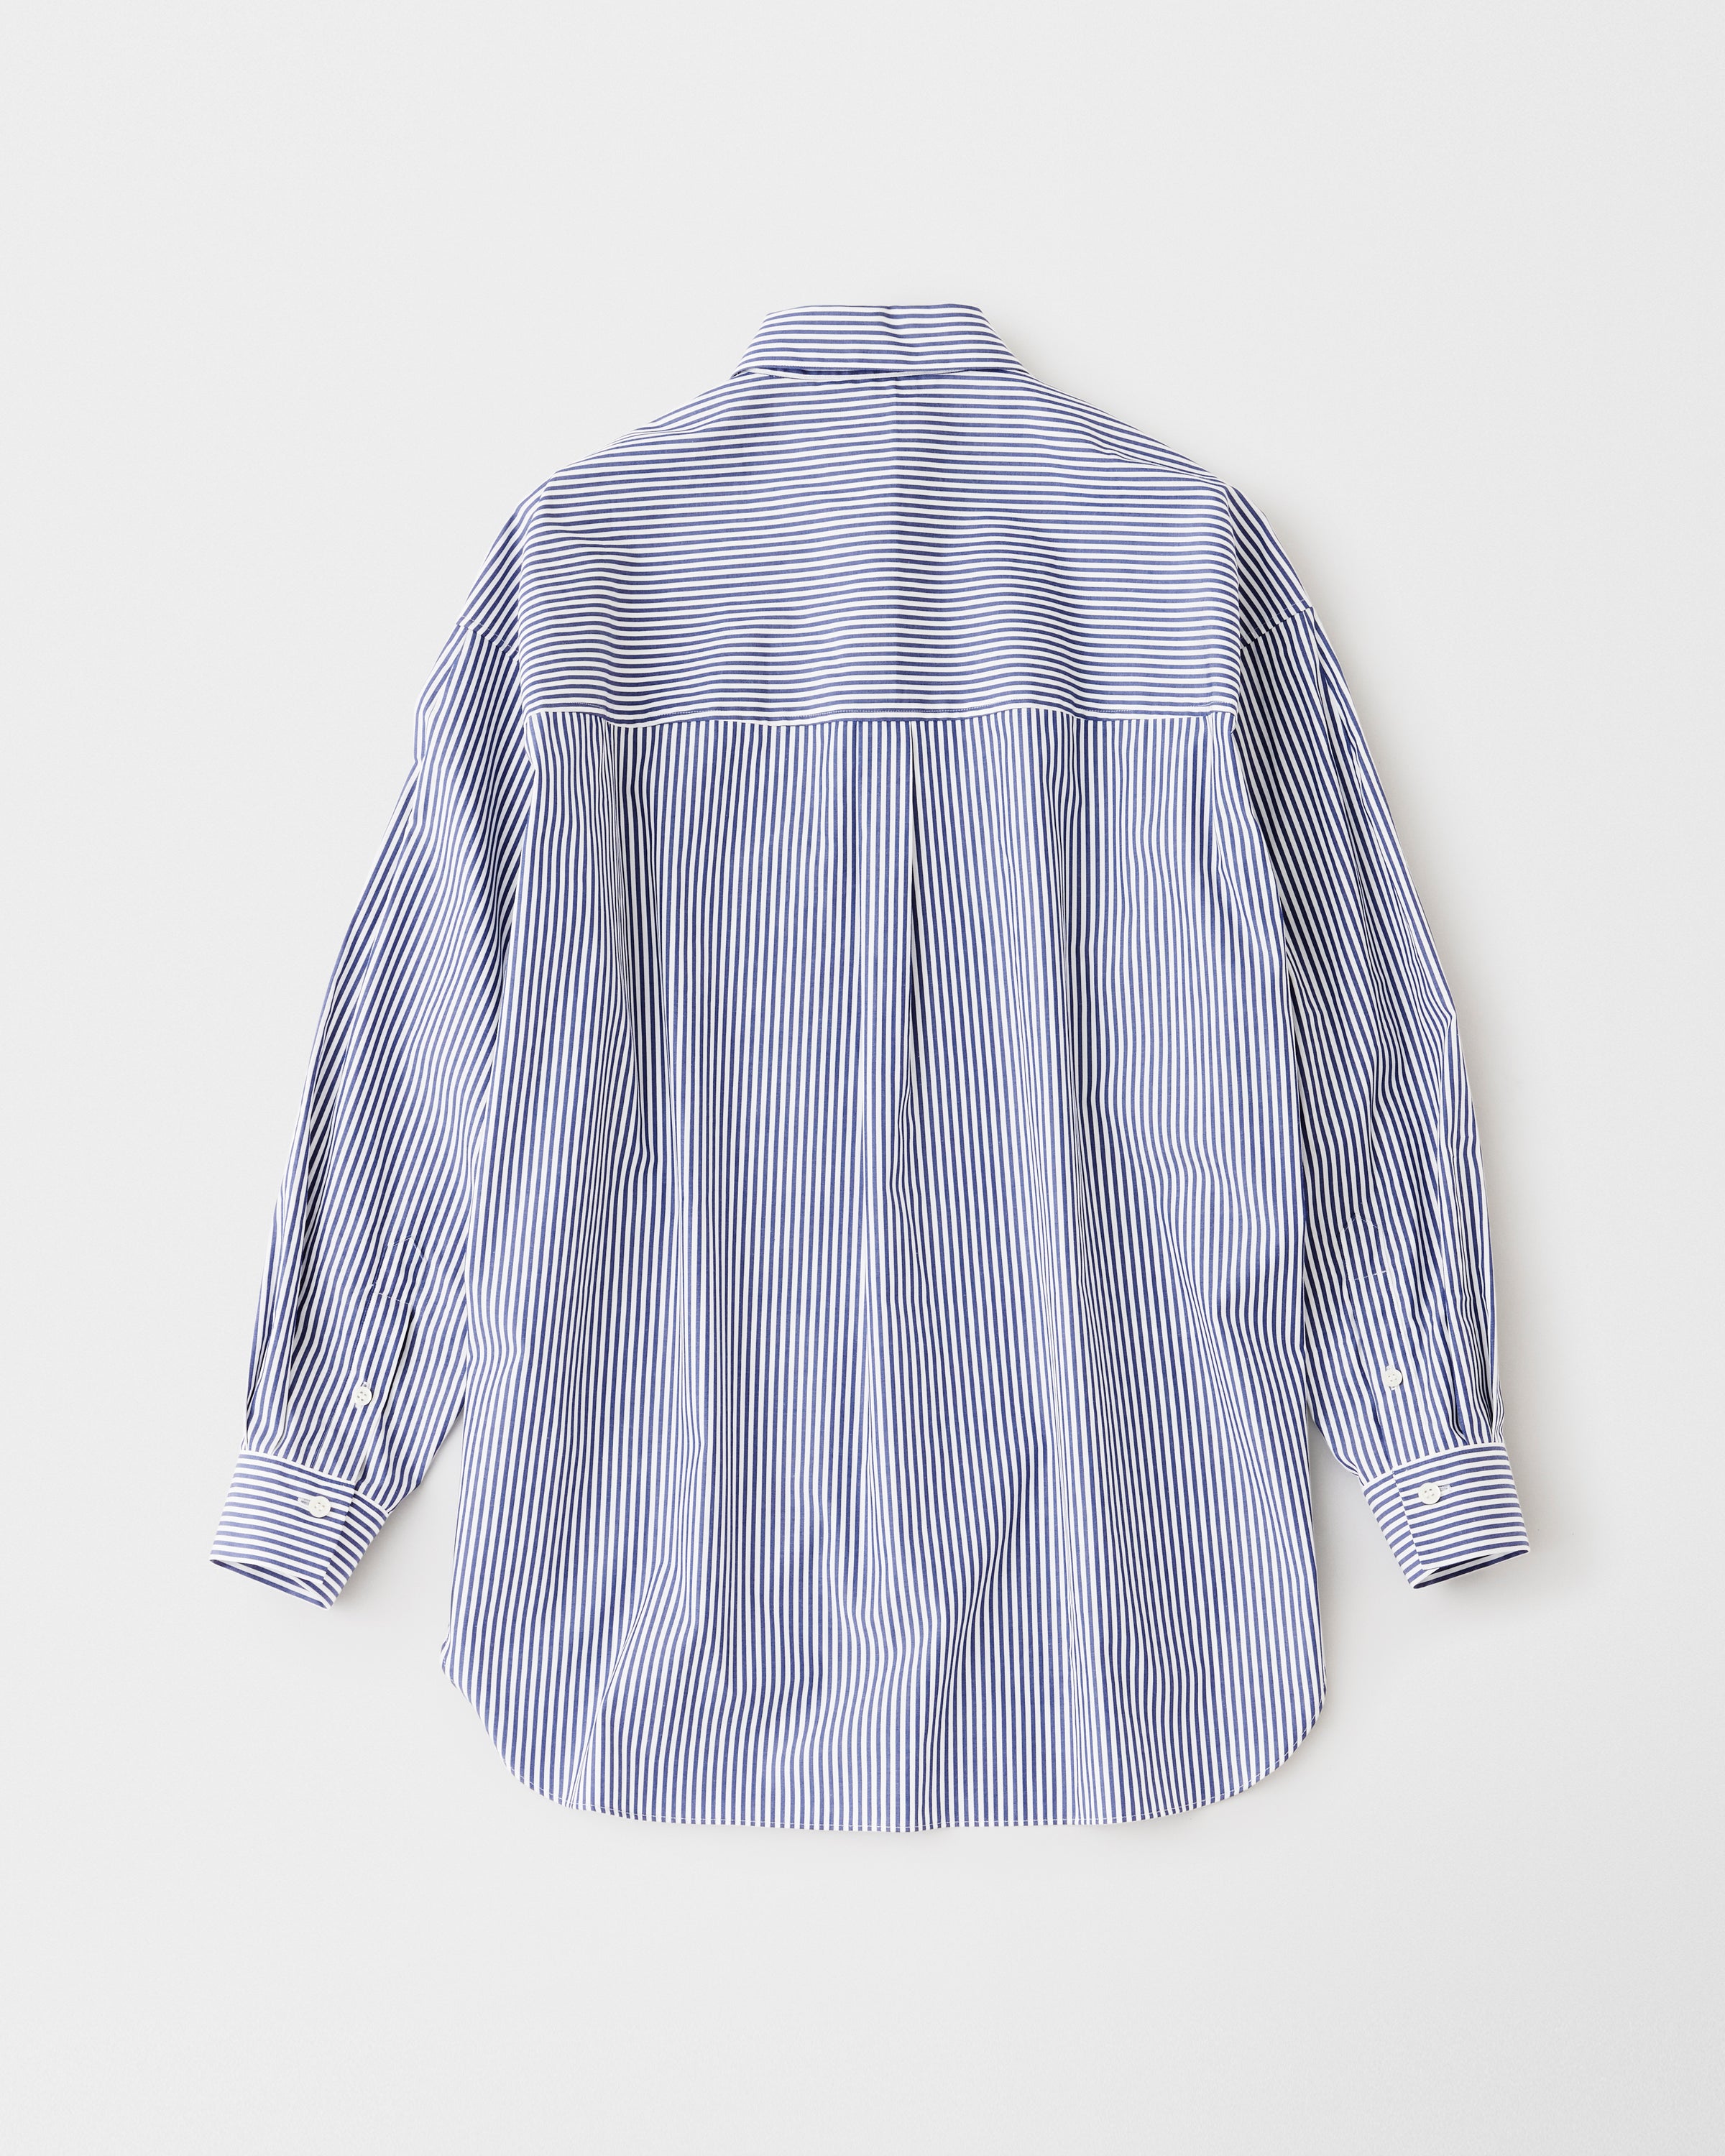 Amalfi Stripe Shirt | MY WEAKNESS Official Site